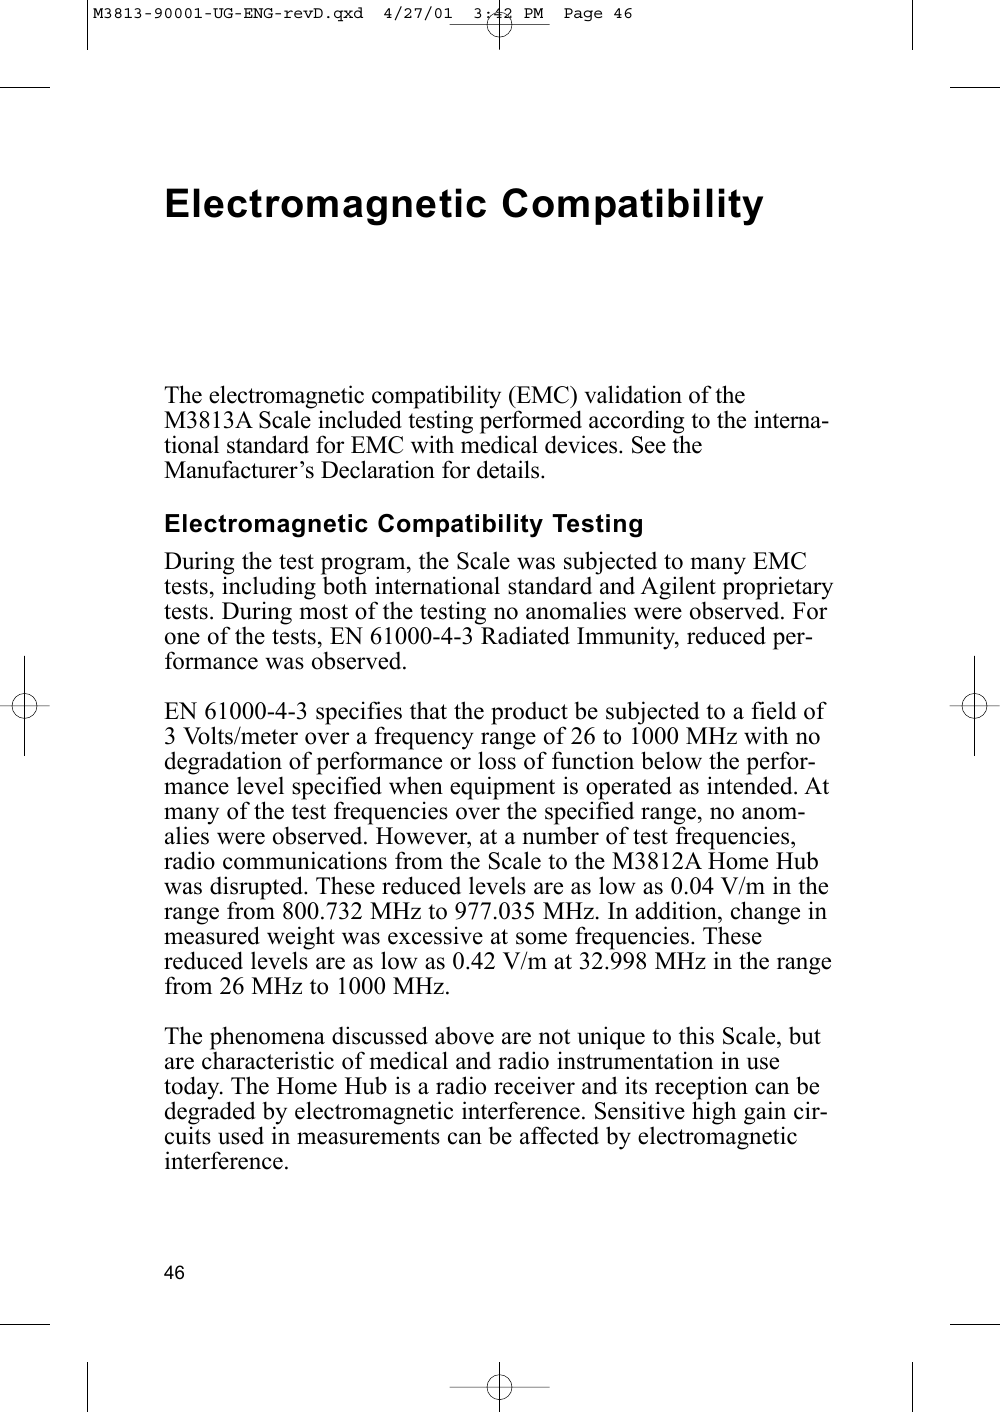 46Electromagnetic CompatibilityThe electromagnetic compatibility (EMC) validation of theM3813A Scale included testing performed according to the interna-tional standard for EMC with medical devices. See theManufacturer’s Declaration for details.Electromagnetic Compatibility TestingDuring the test program, the Scale was subjected to many EMCtests, including both international standard and Agilent proprietarytests. During most of the testing no anomalies were observed. Forone of the tests, EN 61000-4-3 Radiated Immunity, reduced per-formance was observed.EN 61000-4-3 specifies that the product be subjected to a field of3 Volts/meter over a frequency range of 26 to 1000 MHz with nodegradation of performance or loss of function below the perfor-mance level specified when equipment is operated as intended. Atmany of the test frequencies over the specified range, no anom-alies were observed. However, at a number of test frequencies,radio communications from the Scale to the M3812A Home Hubwas disrupted. These reduced levels are as low as 0.04 V/m in therange from 800.732 MHz to 977.035 MHz. In addition, change inmeasured weight was excessive at some frequencies. Thesereduced levels are as low as 0.42 V/m at 32.998 MHz in the rangefrom 26 MHz to 1000 MHz.The phenomena discussed above are not unique to this Scale, butare characteristic of medical and radio instrumentation in usetoday. The Home Hub is a radio receiver and its reception can bedegraded by electromagnetic interference. Sensitive high gain cir-cuits used in measurements can be affected by electromagneticinterference.M3813-90001-UG-ENG-revD.qxd  4/27/01  3:42 PM  Page 46